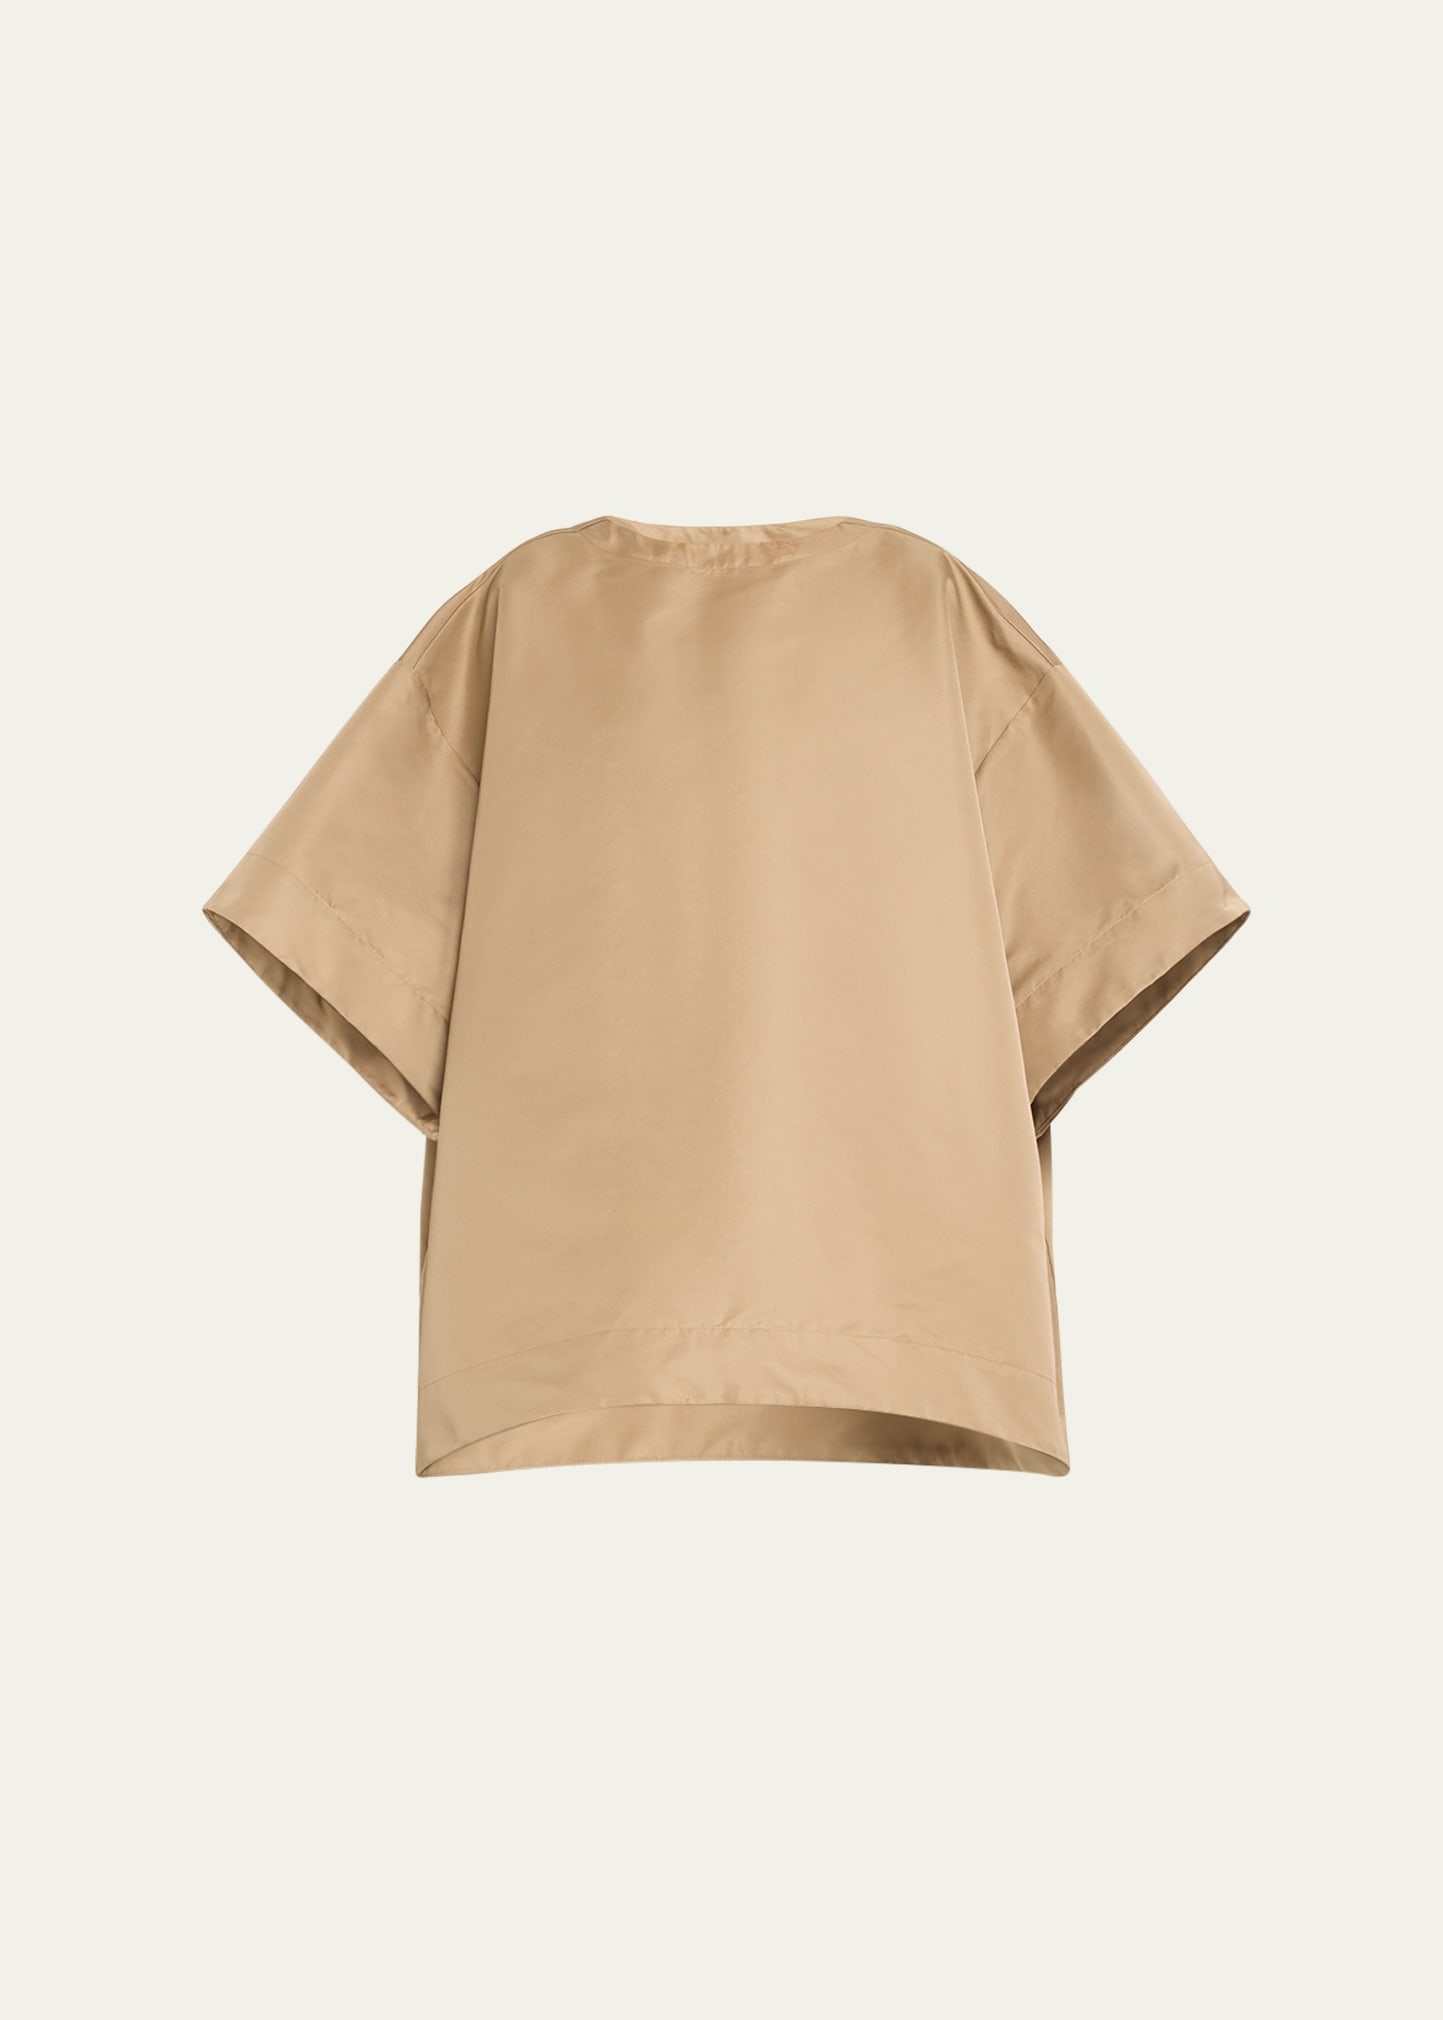 Puppets And Puppets Sculpt Boxy Tunic Top In Khaki